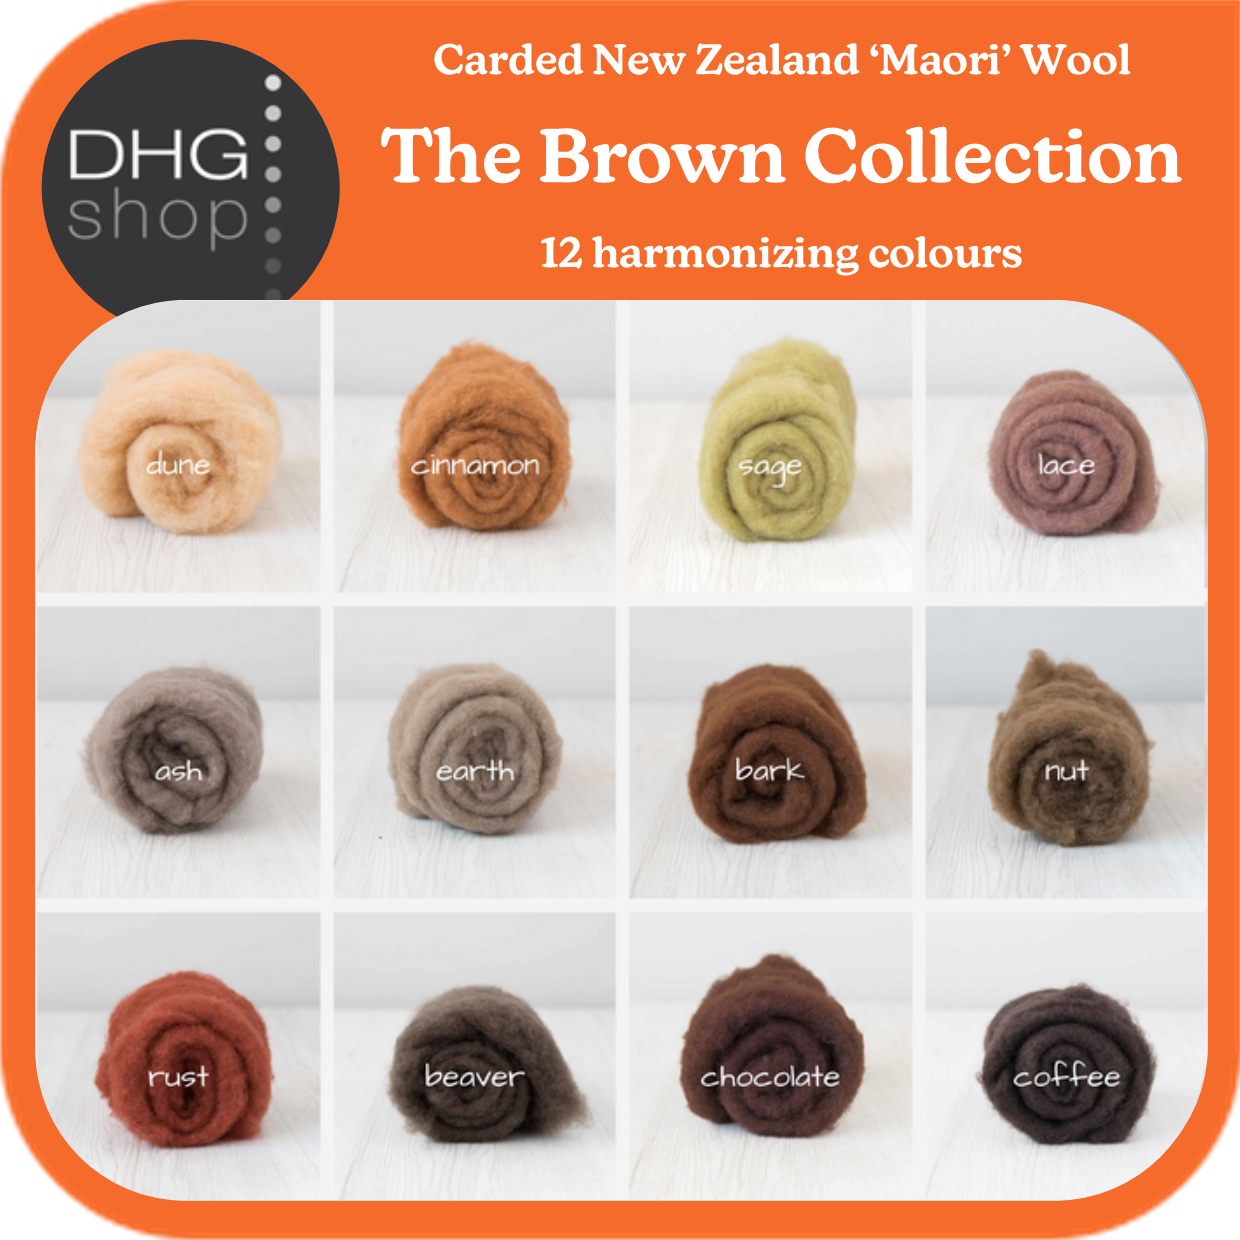 The Brown Collection - Carded New Zealand Wool DHG 'Maori' Batts